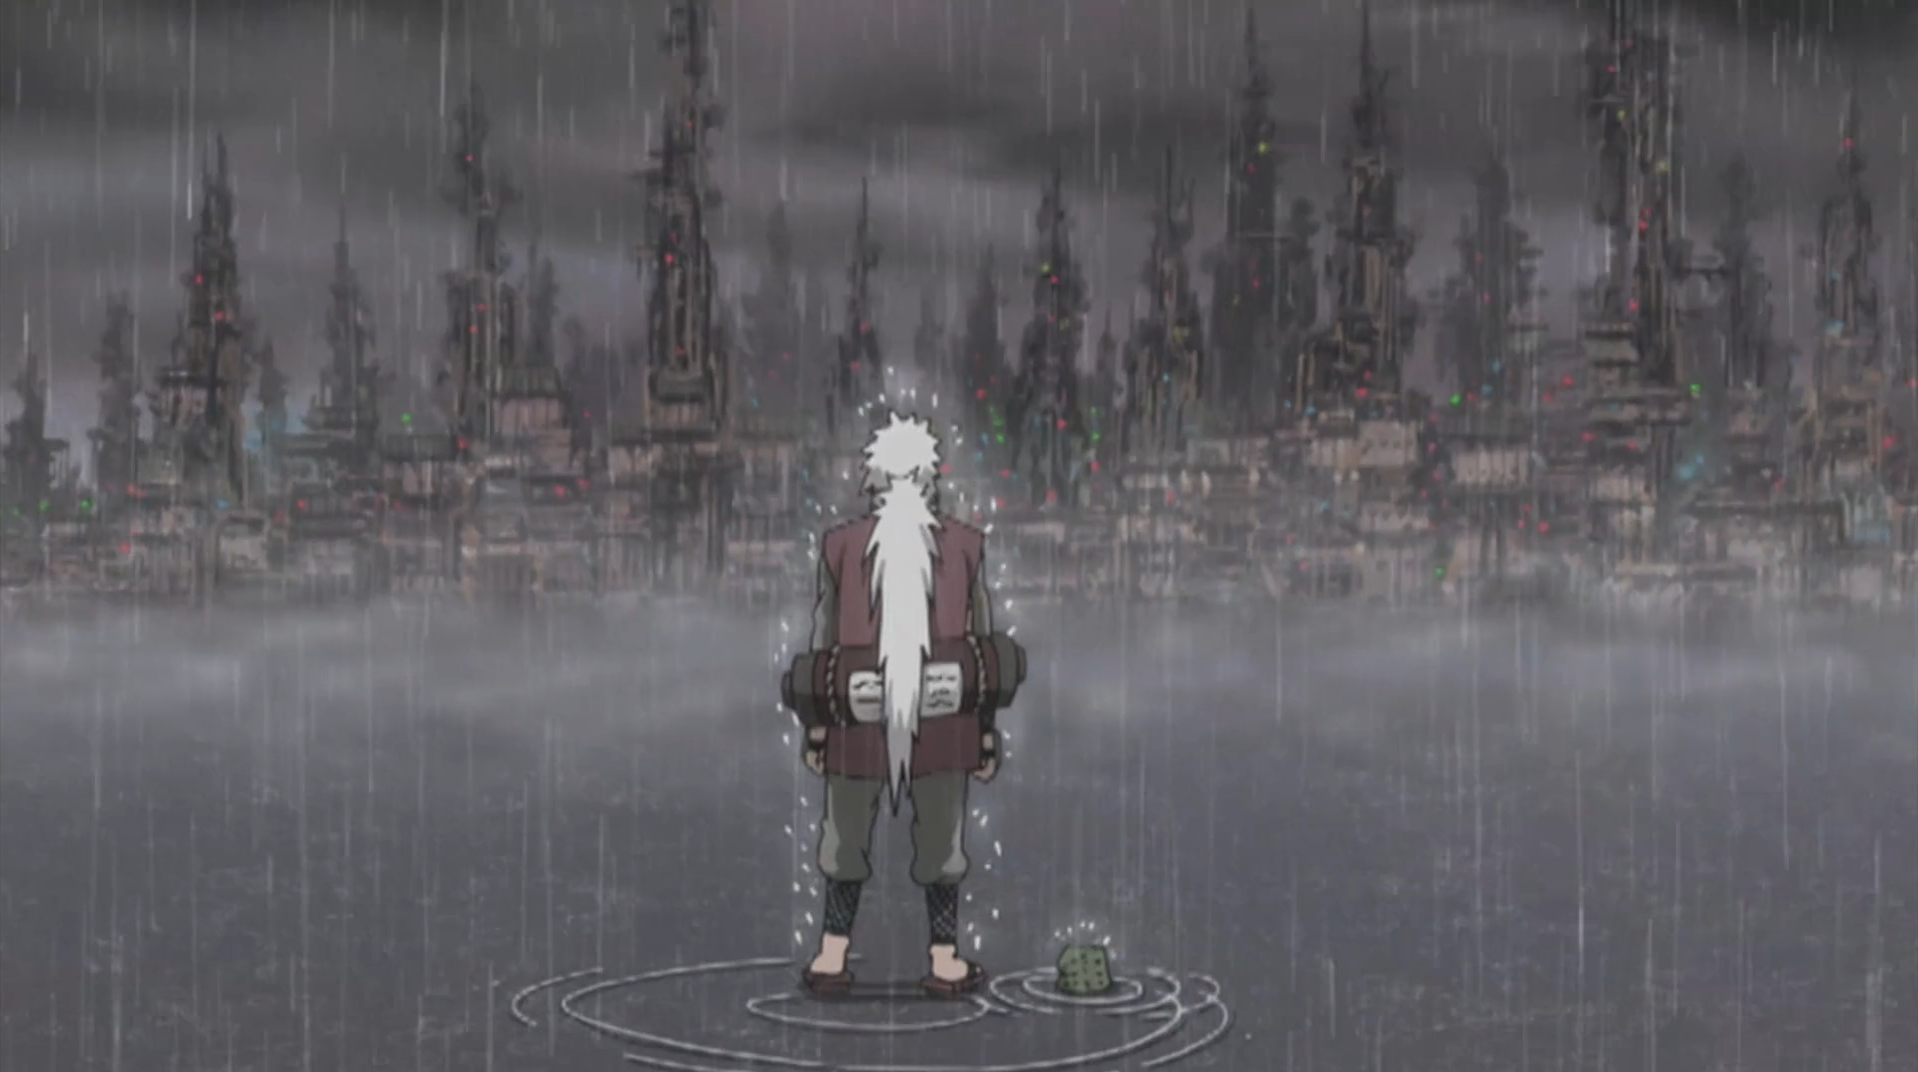 What religion is naruto lol, its from the episode where everyone gets  revived with rinne-rebirth, he was praying at Jiraiya's grave. : r/Naruto